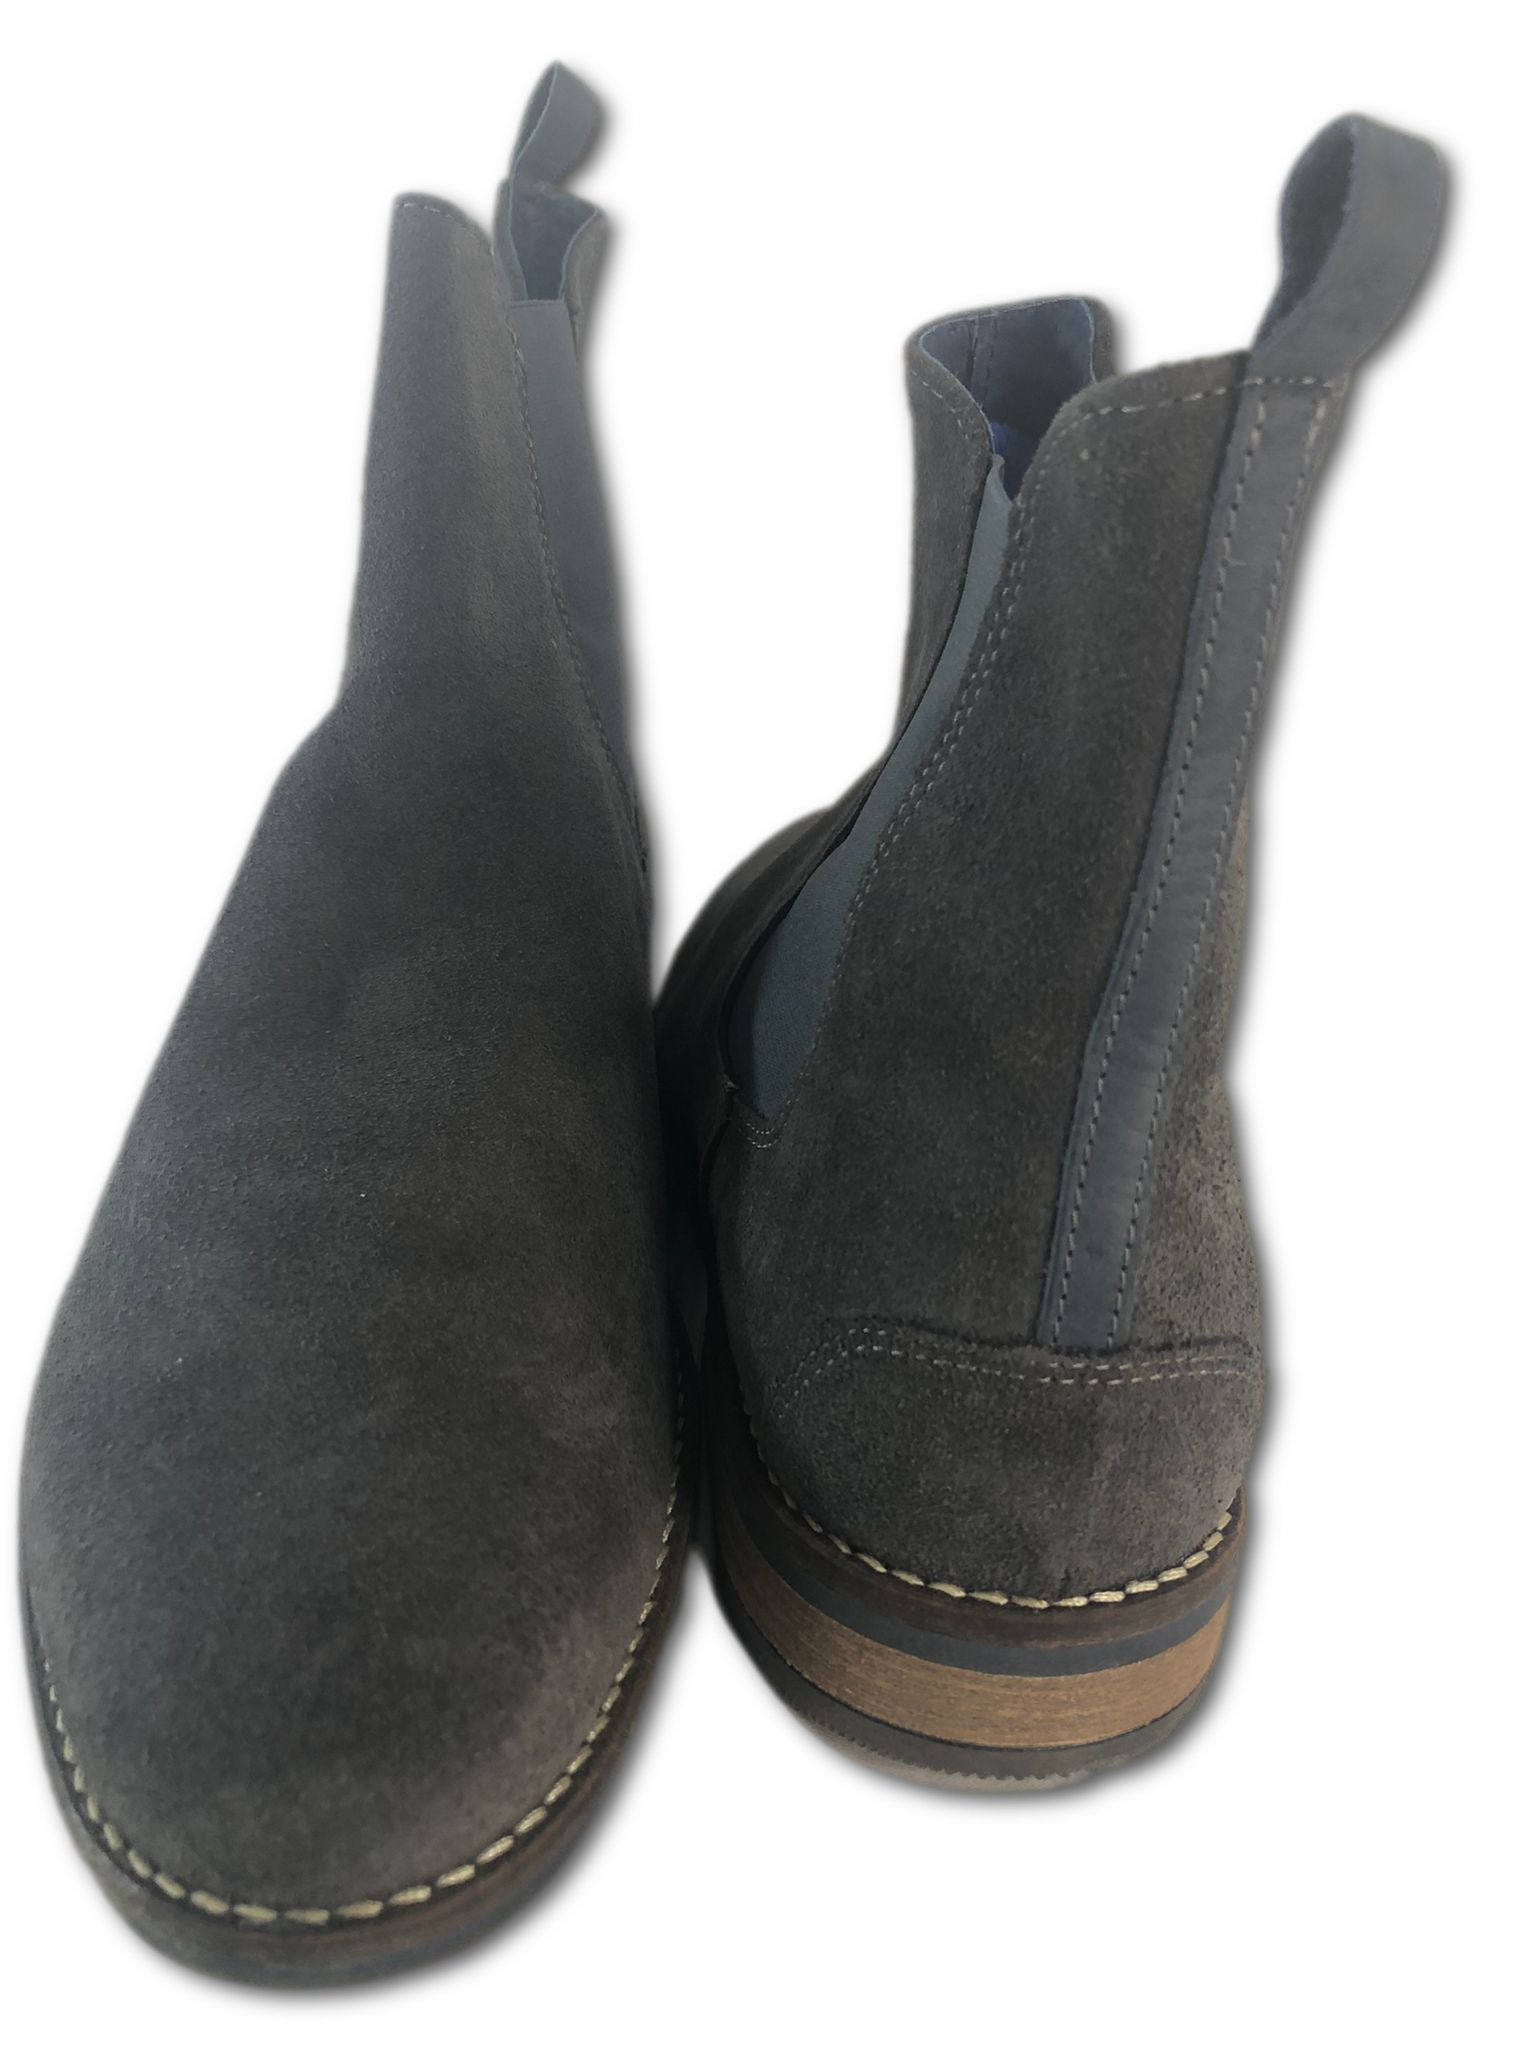 8.5M Gray PARC City Boot Chelsea - Genuine Leather, Pull-On